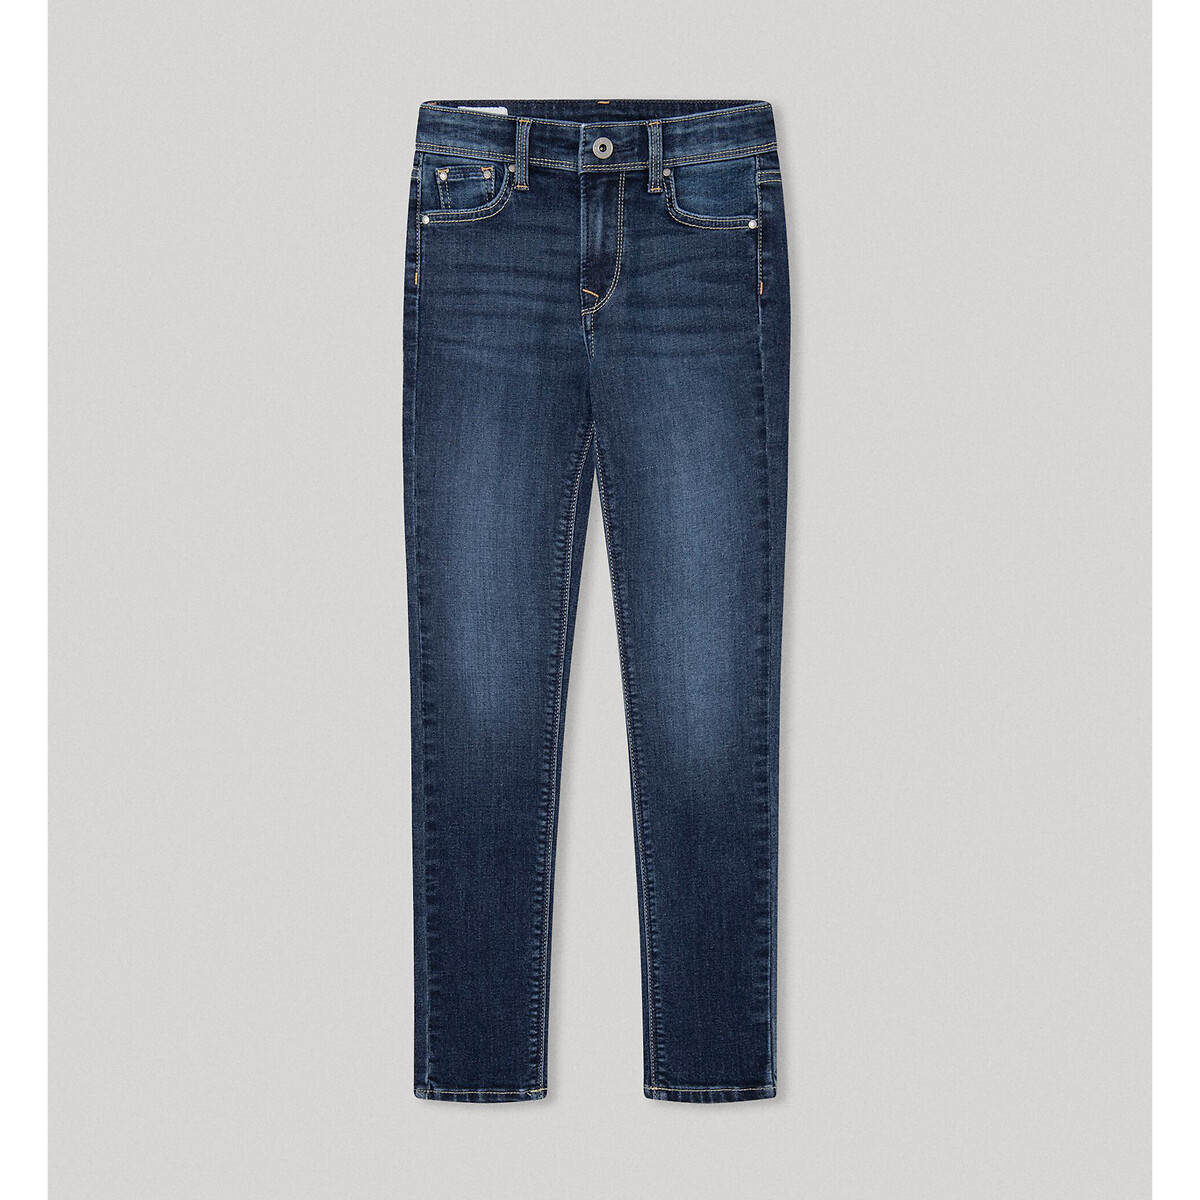 Image of Pixlette Skinny Jeans with High Waist